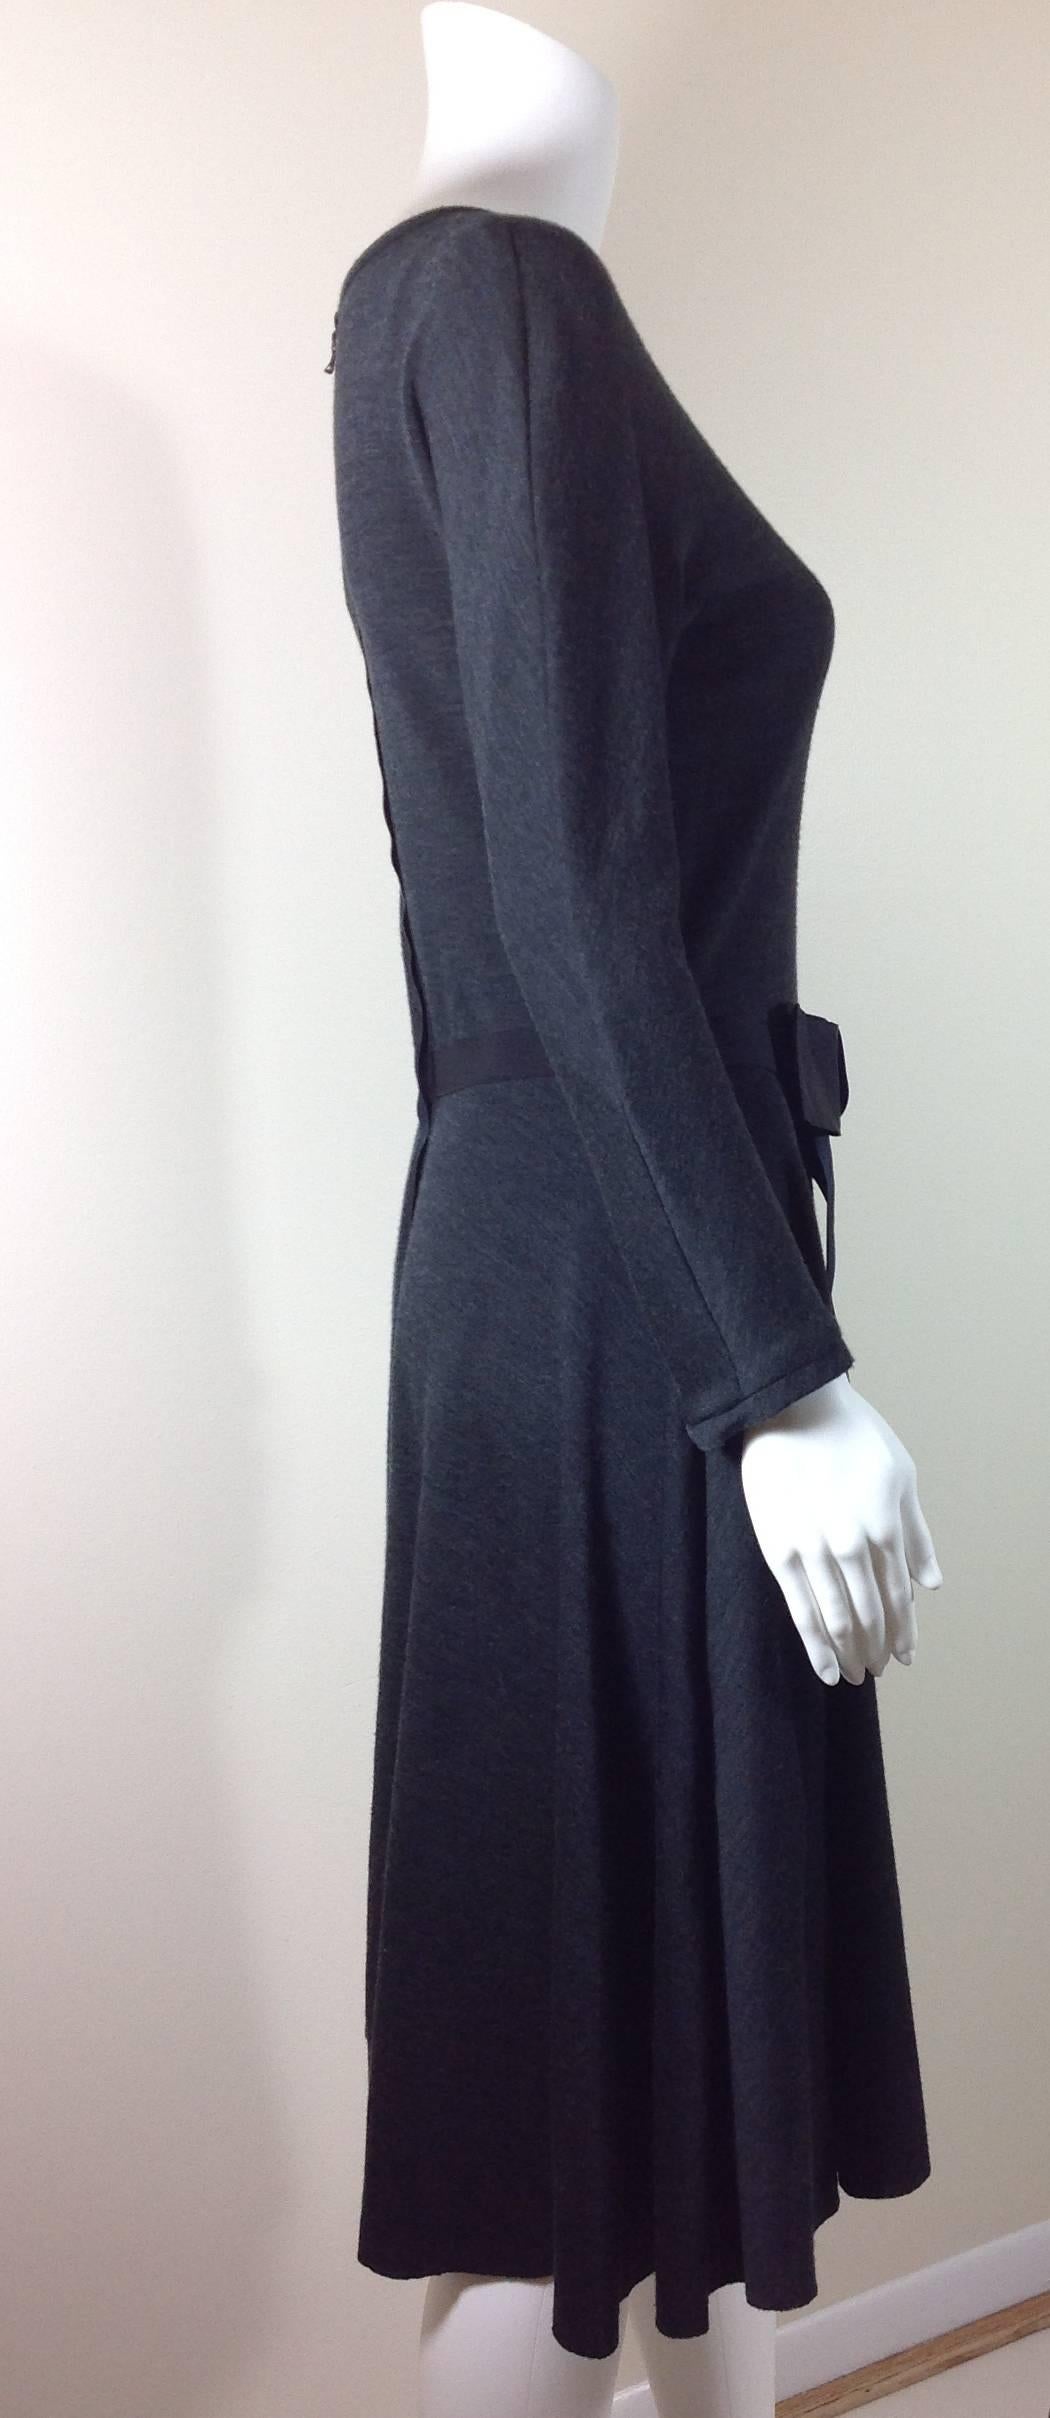 Heathered grey wool jersey Lanvin dress, from the 2006 collection. 
19.5